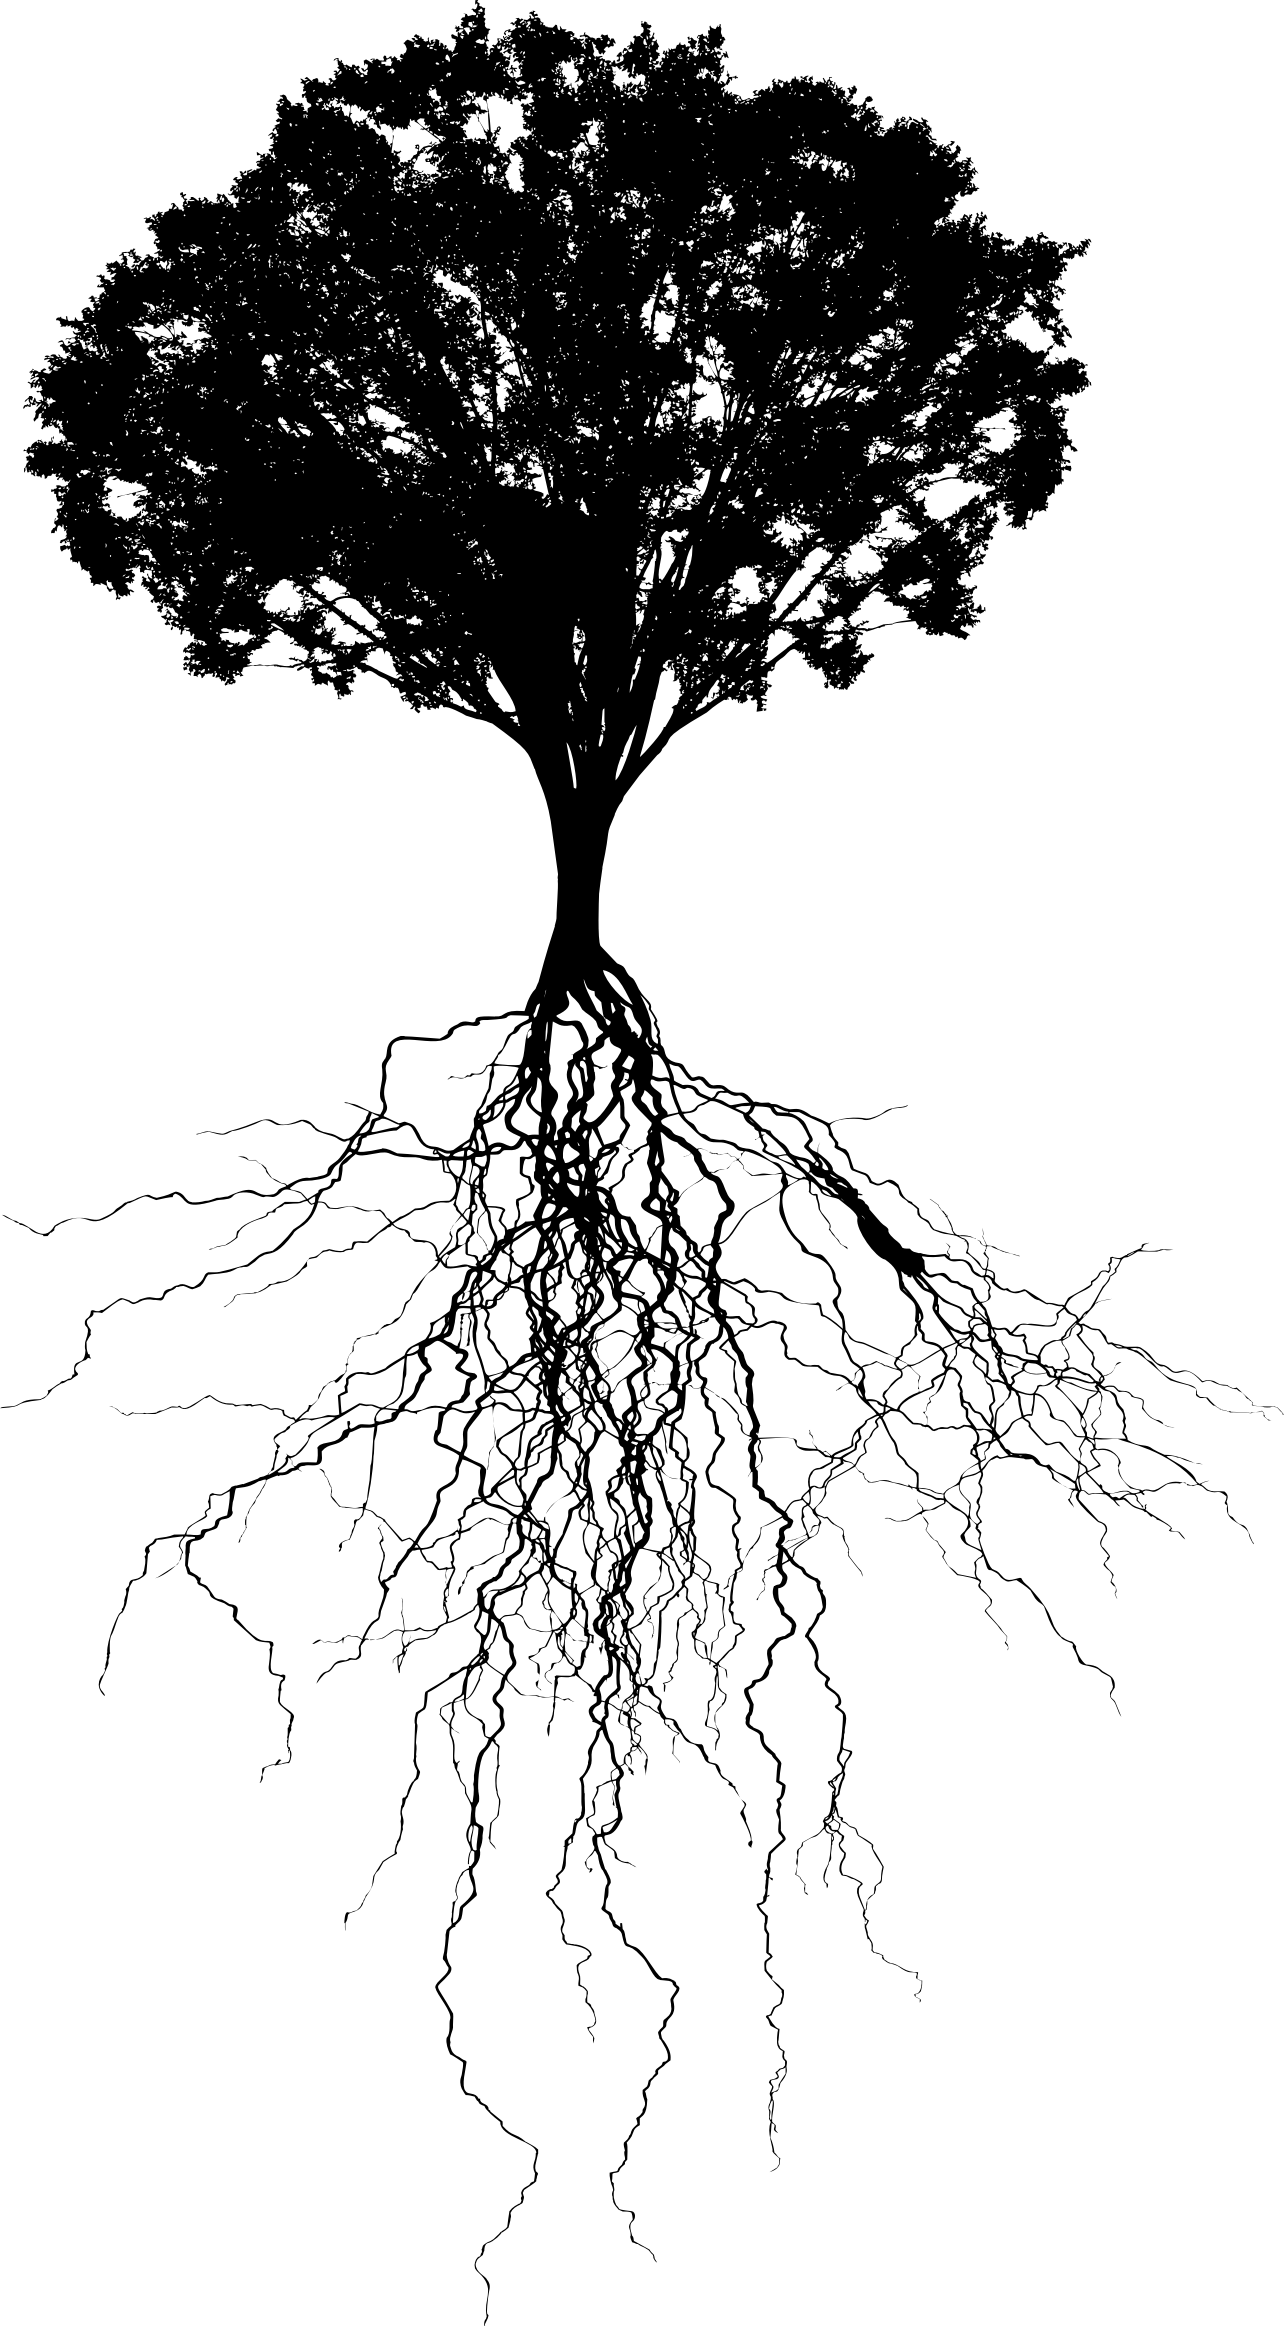 Black and White Tree with Roots Logo - 20 Roots png for free download on YA-webdesign